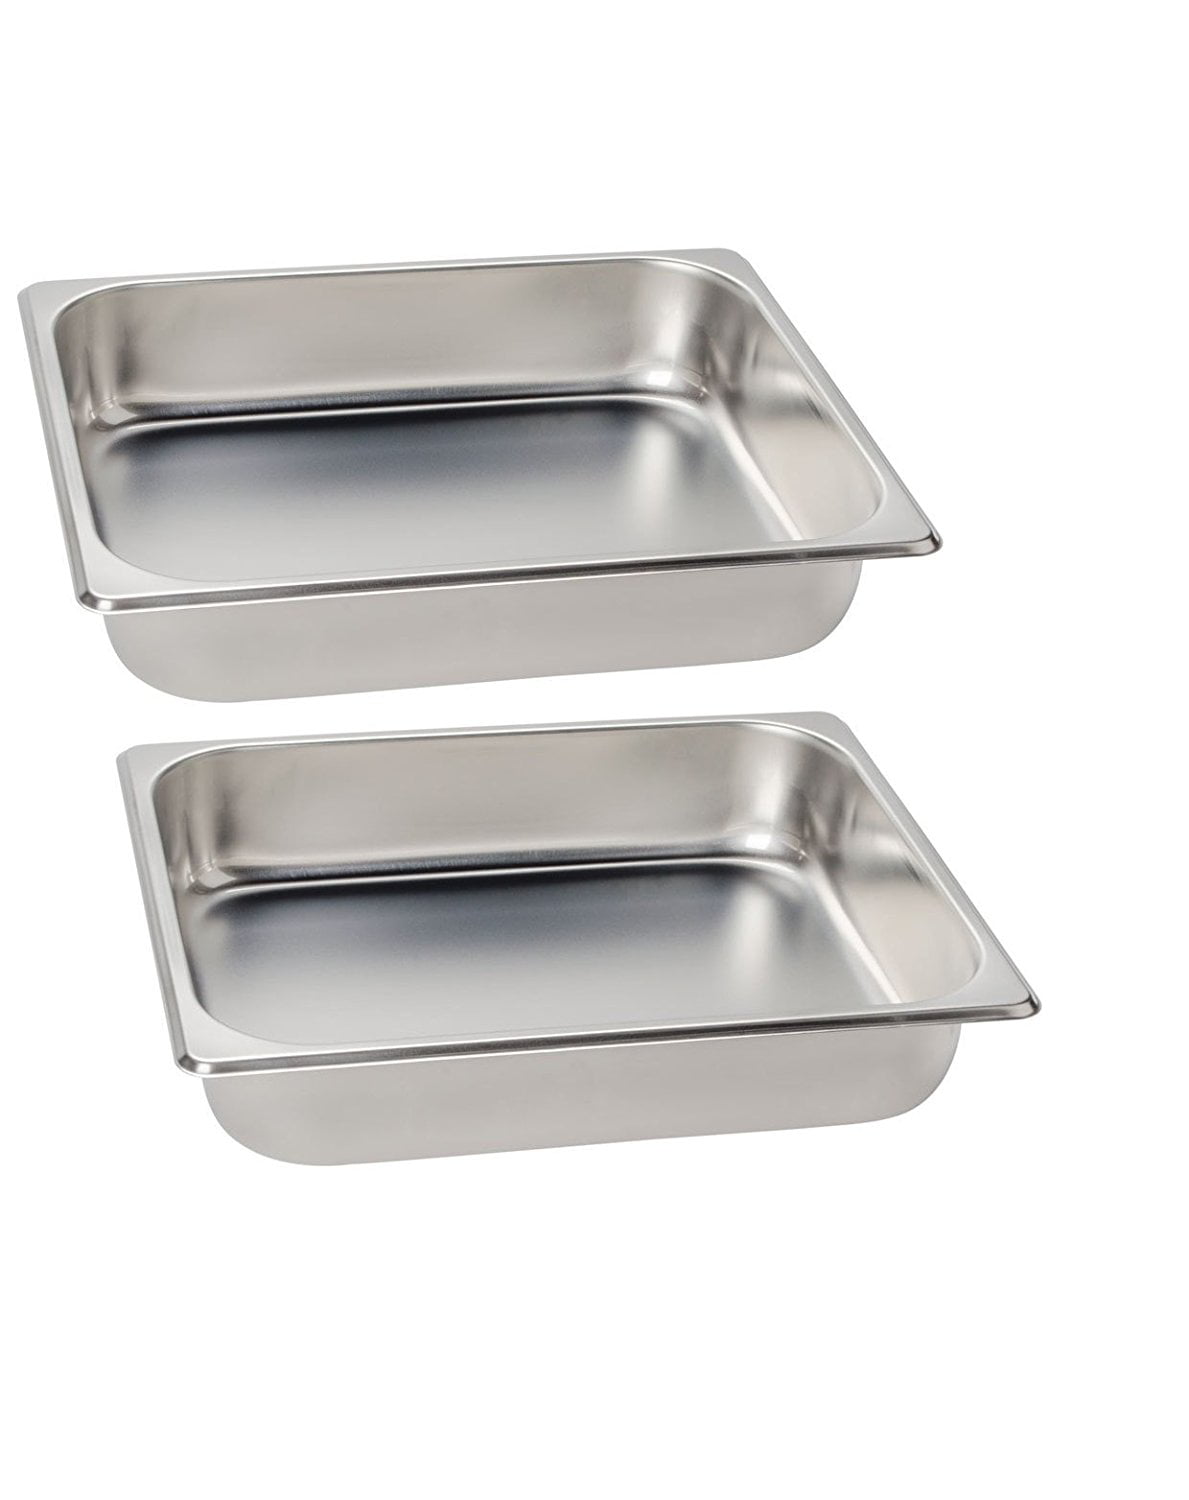 Full Size 2 1/2" Deep Stainless Steel Steam Table Hotel Buffet Food Pan 6 PACK 